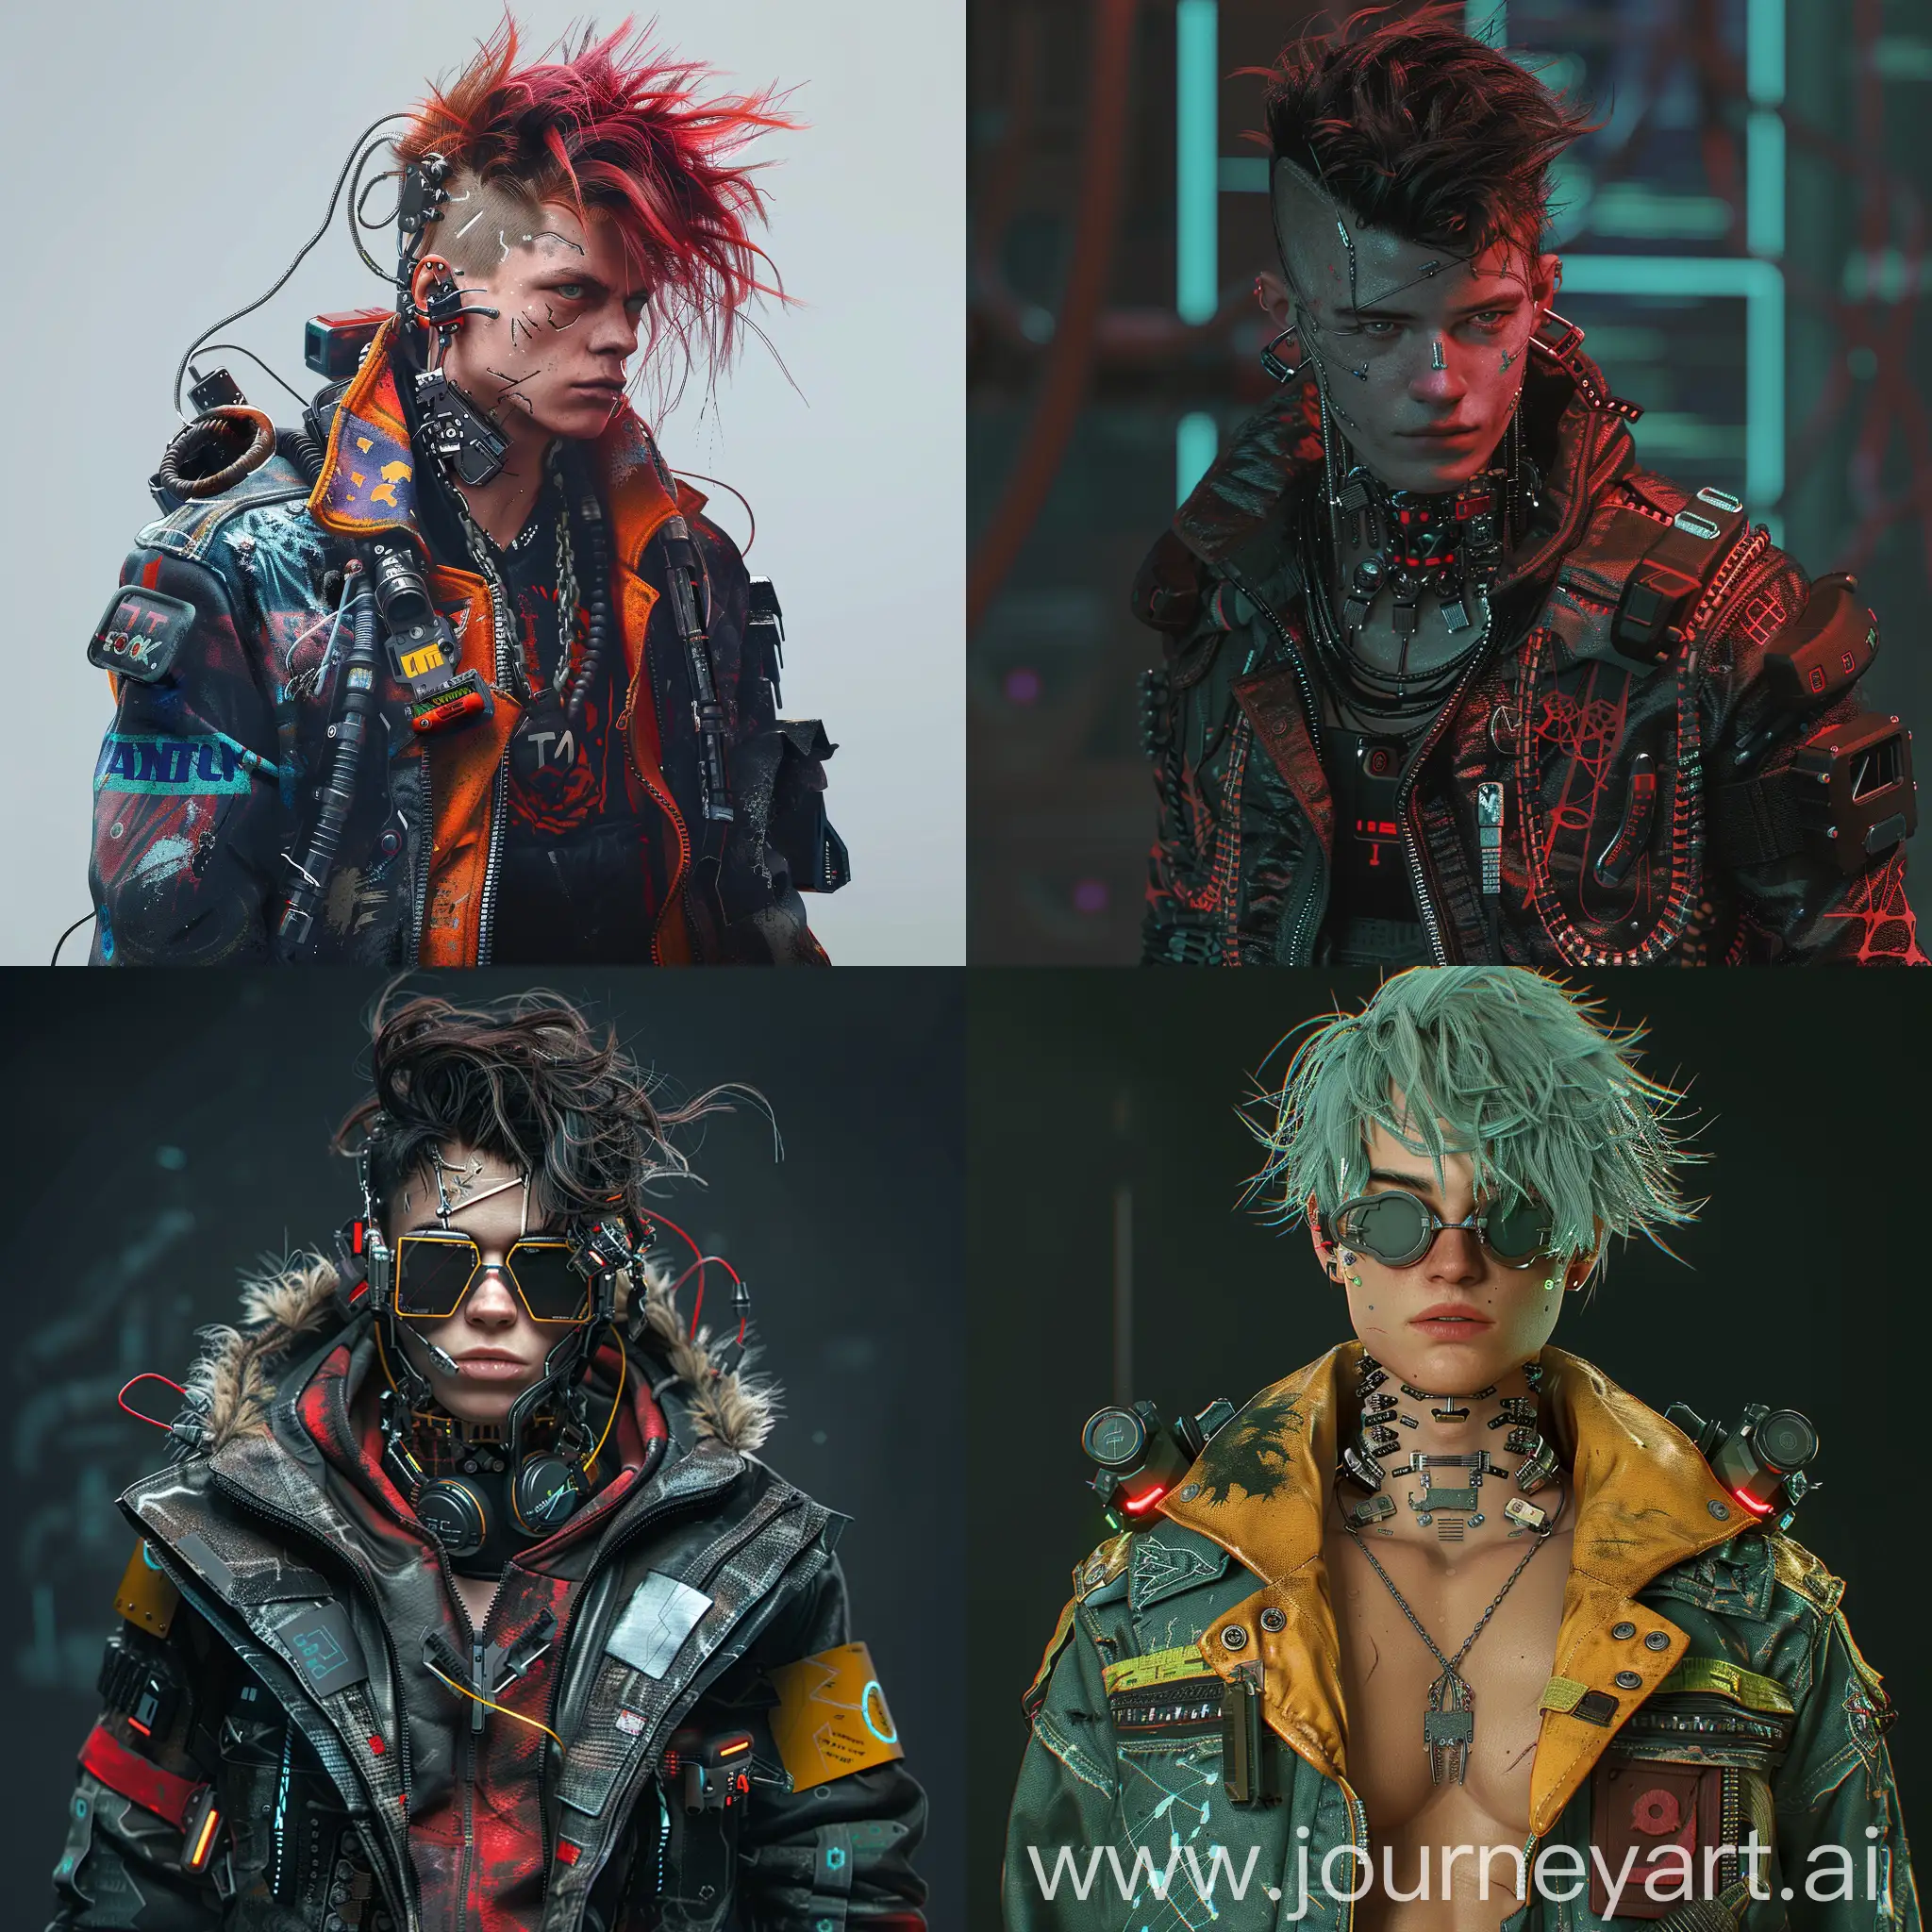 Cyberpunk,rockerboy character,20 years old, grunge styled futuristic clothing,hacker,a lot of implants